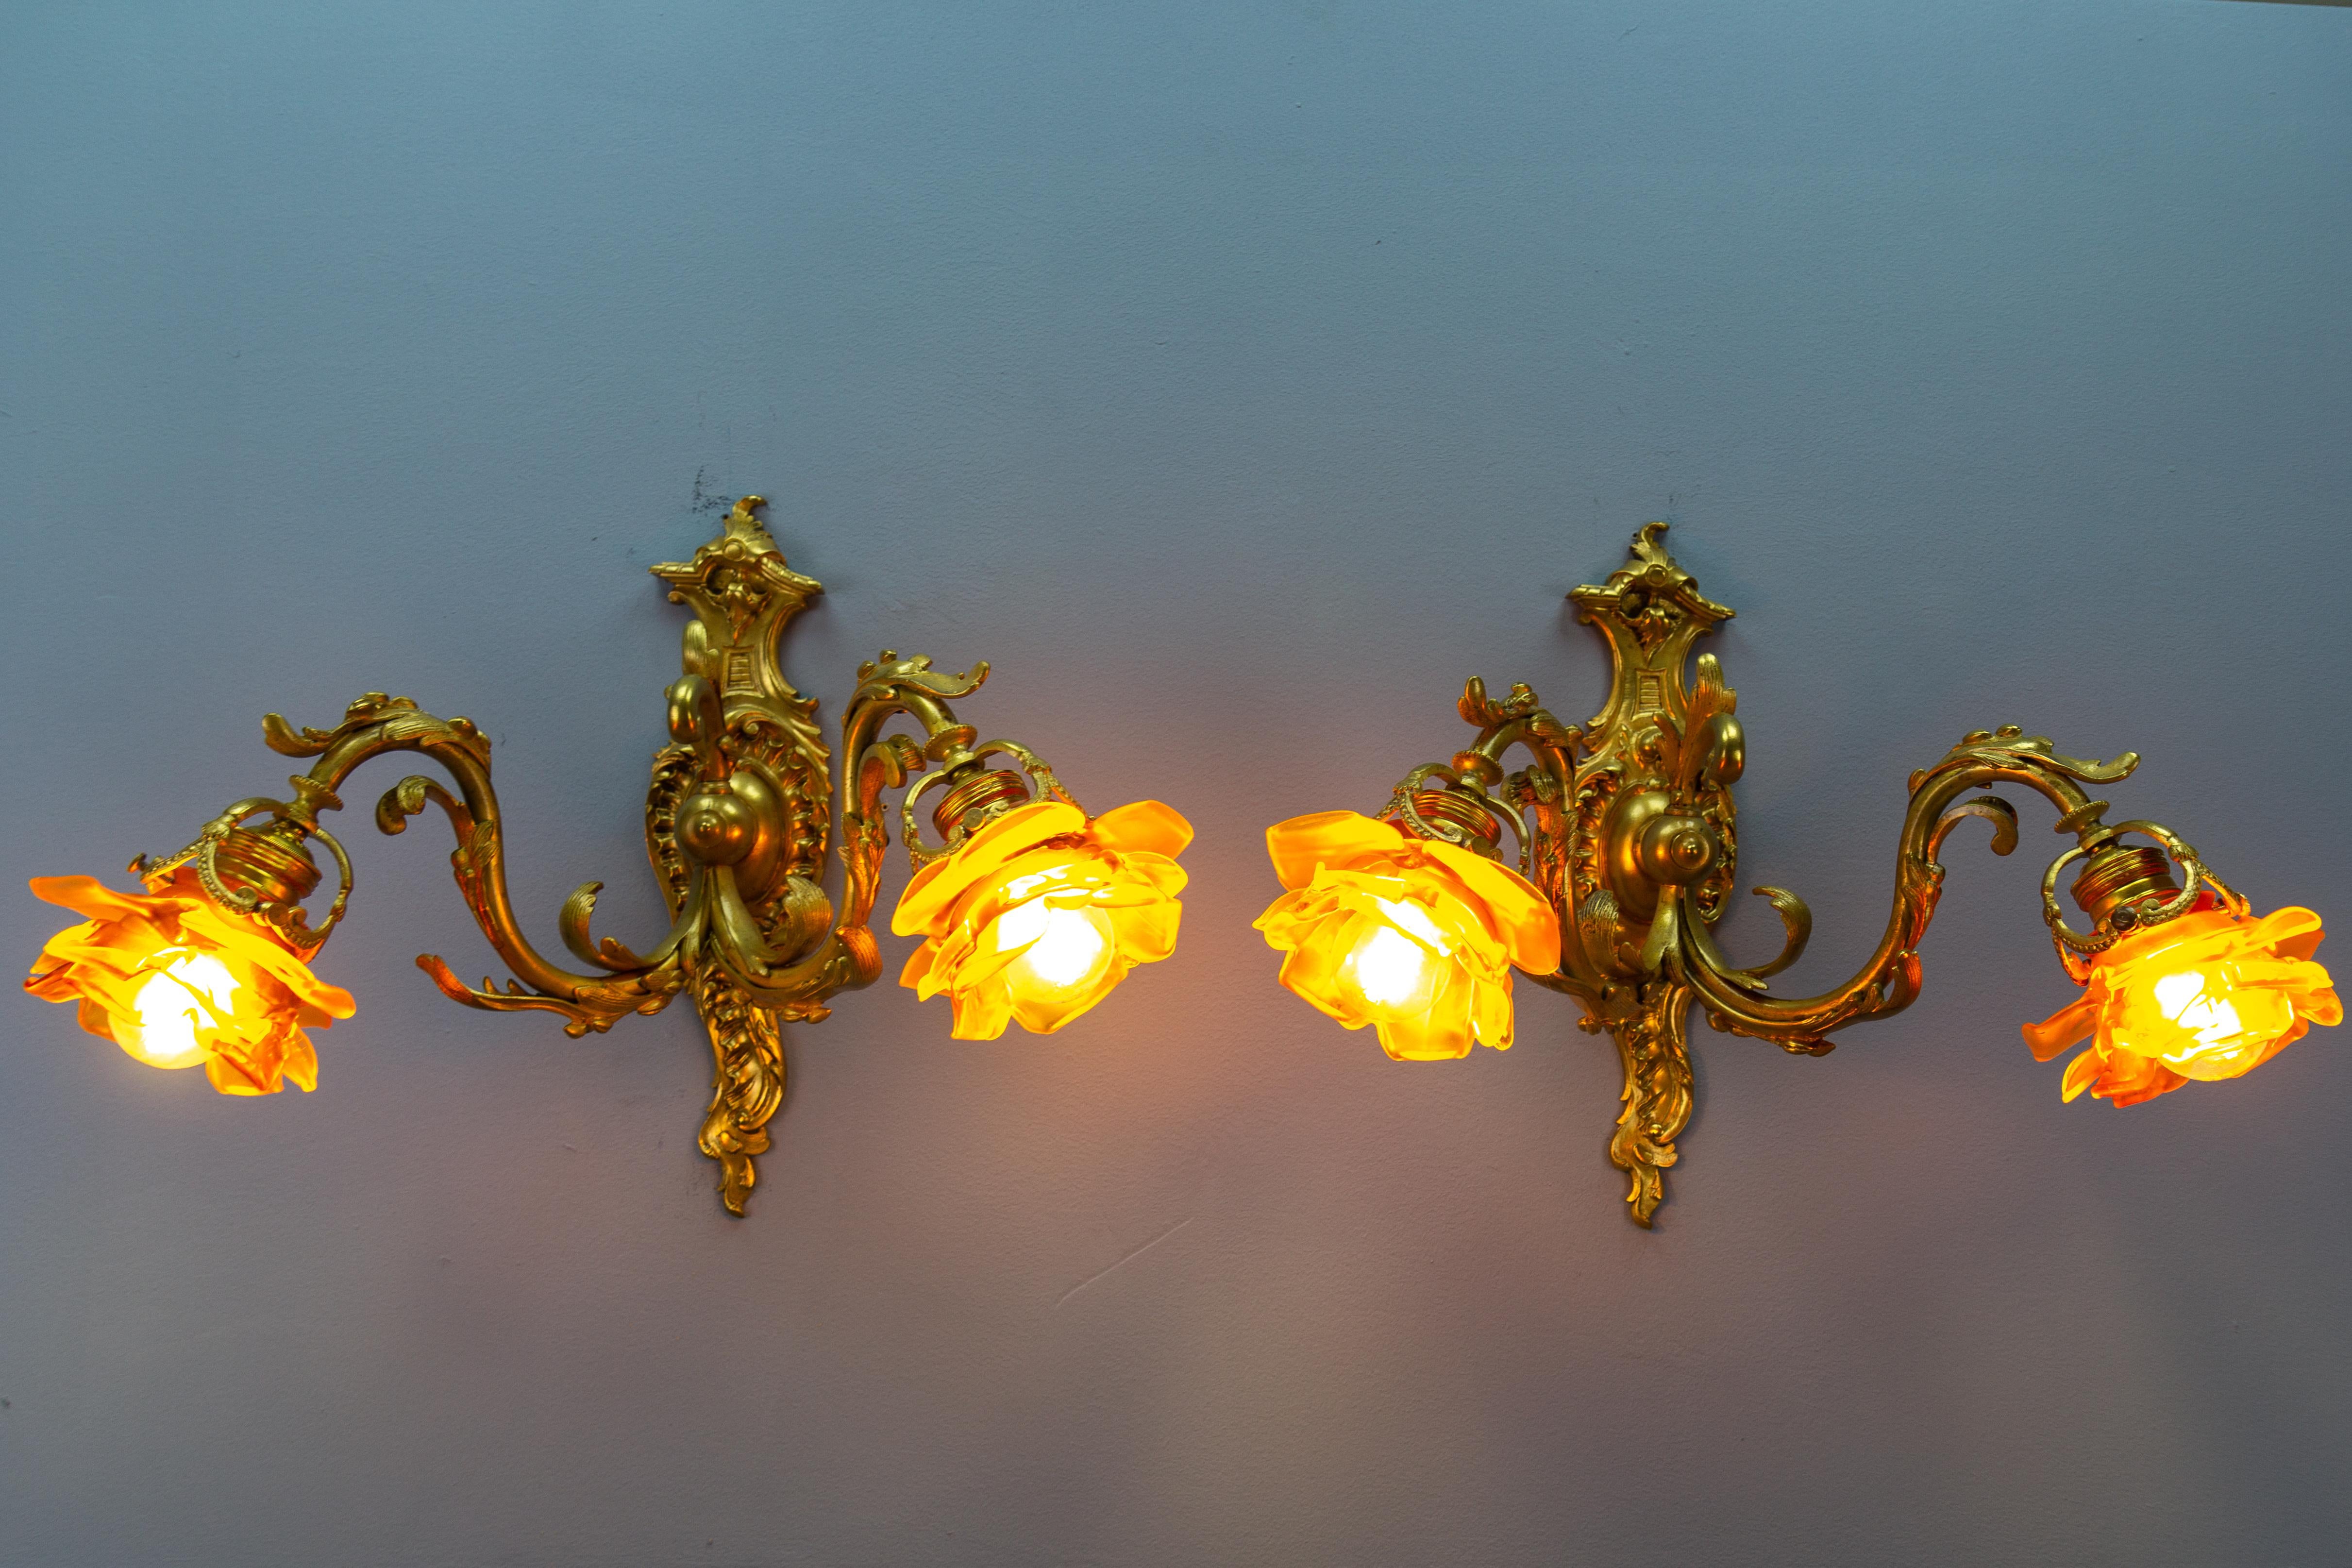 Pair of French Louis XV style bronze and brown glass twin arm sconces from ca. 1900.
These large, impressive Louis XV or Rococo-style sconces feature bronze arms and a backplate of characteristic Rococo design, of scroll shape with scrolling foliate